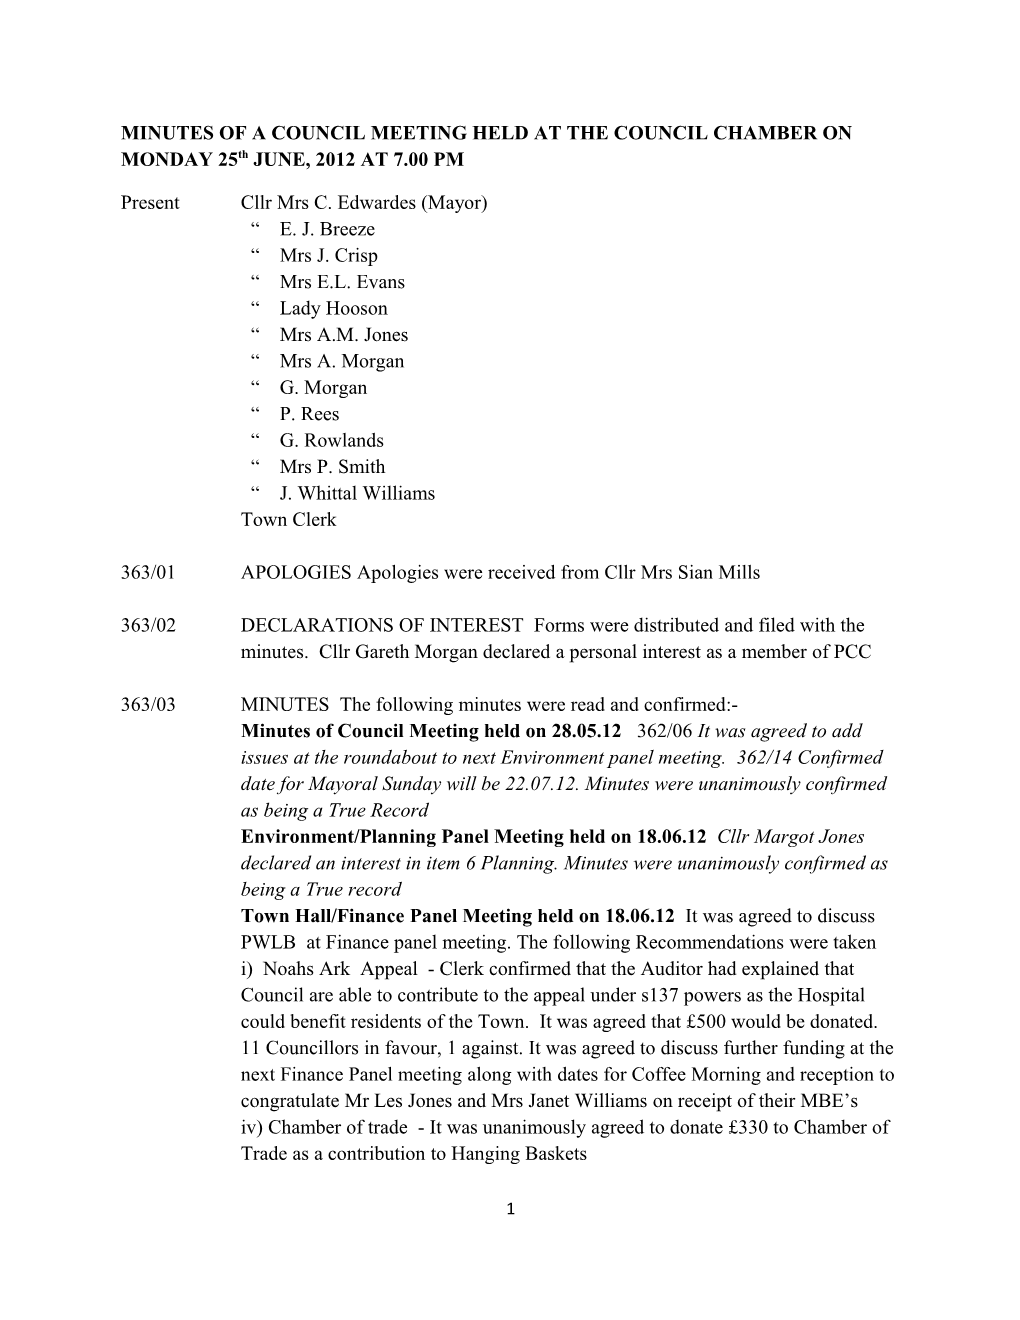 MINUTES of a COUNCIL MEETING HELD at the COUNCIL CHAMBER on MONDAY 25Th JUNE, 2012 at 7.00 PM